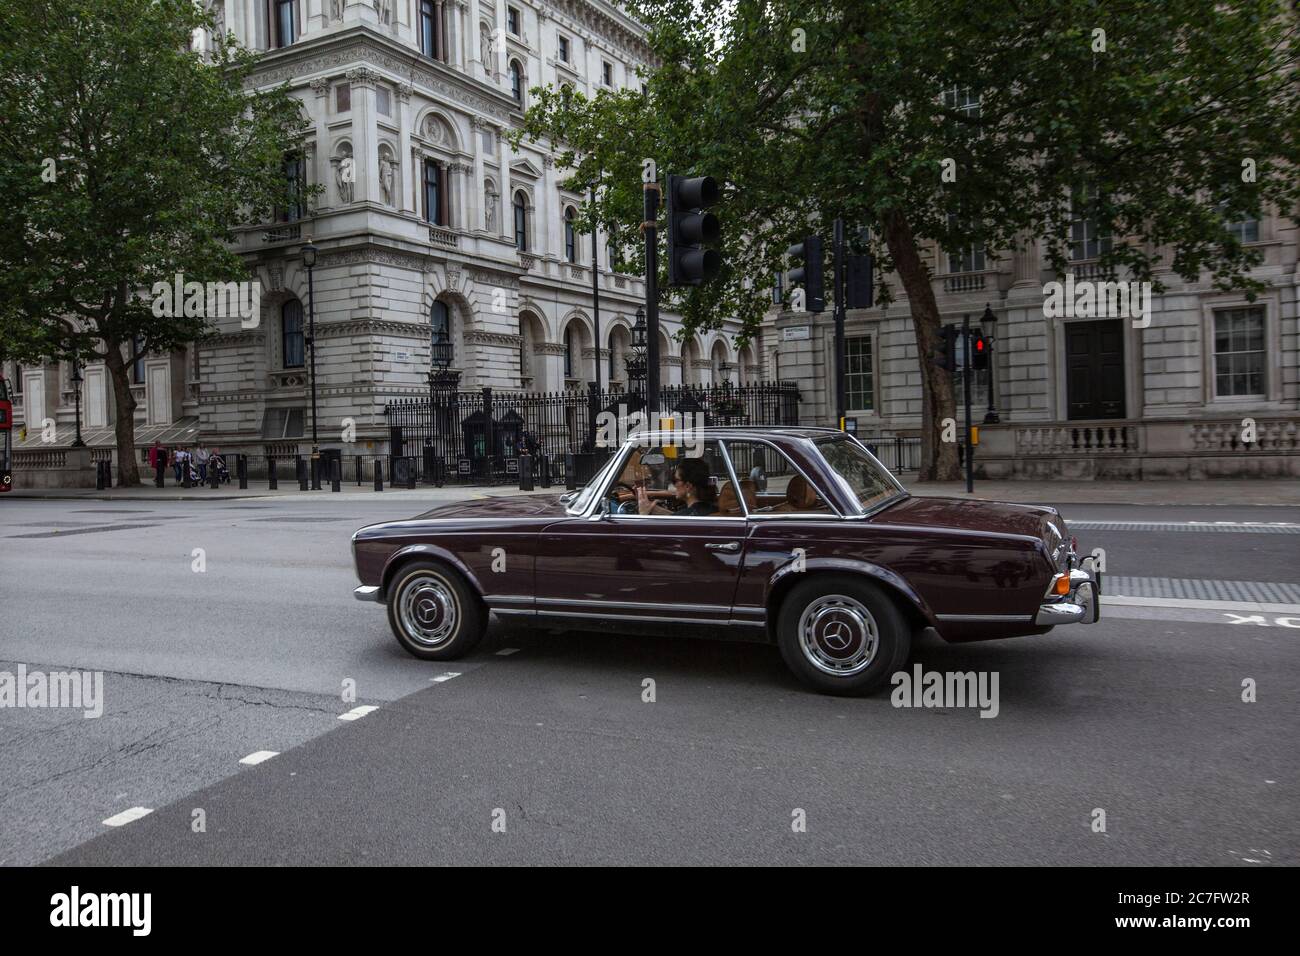 Classic Mercedes-Benz travels past the gates of Downing Street, Whitehall during the quietness of coronavirus lockdown restrictions, central London UK Stock Photo